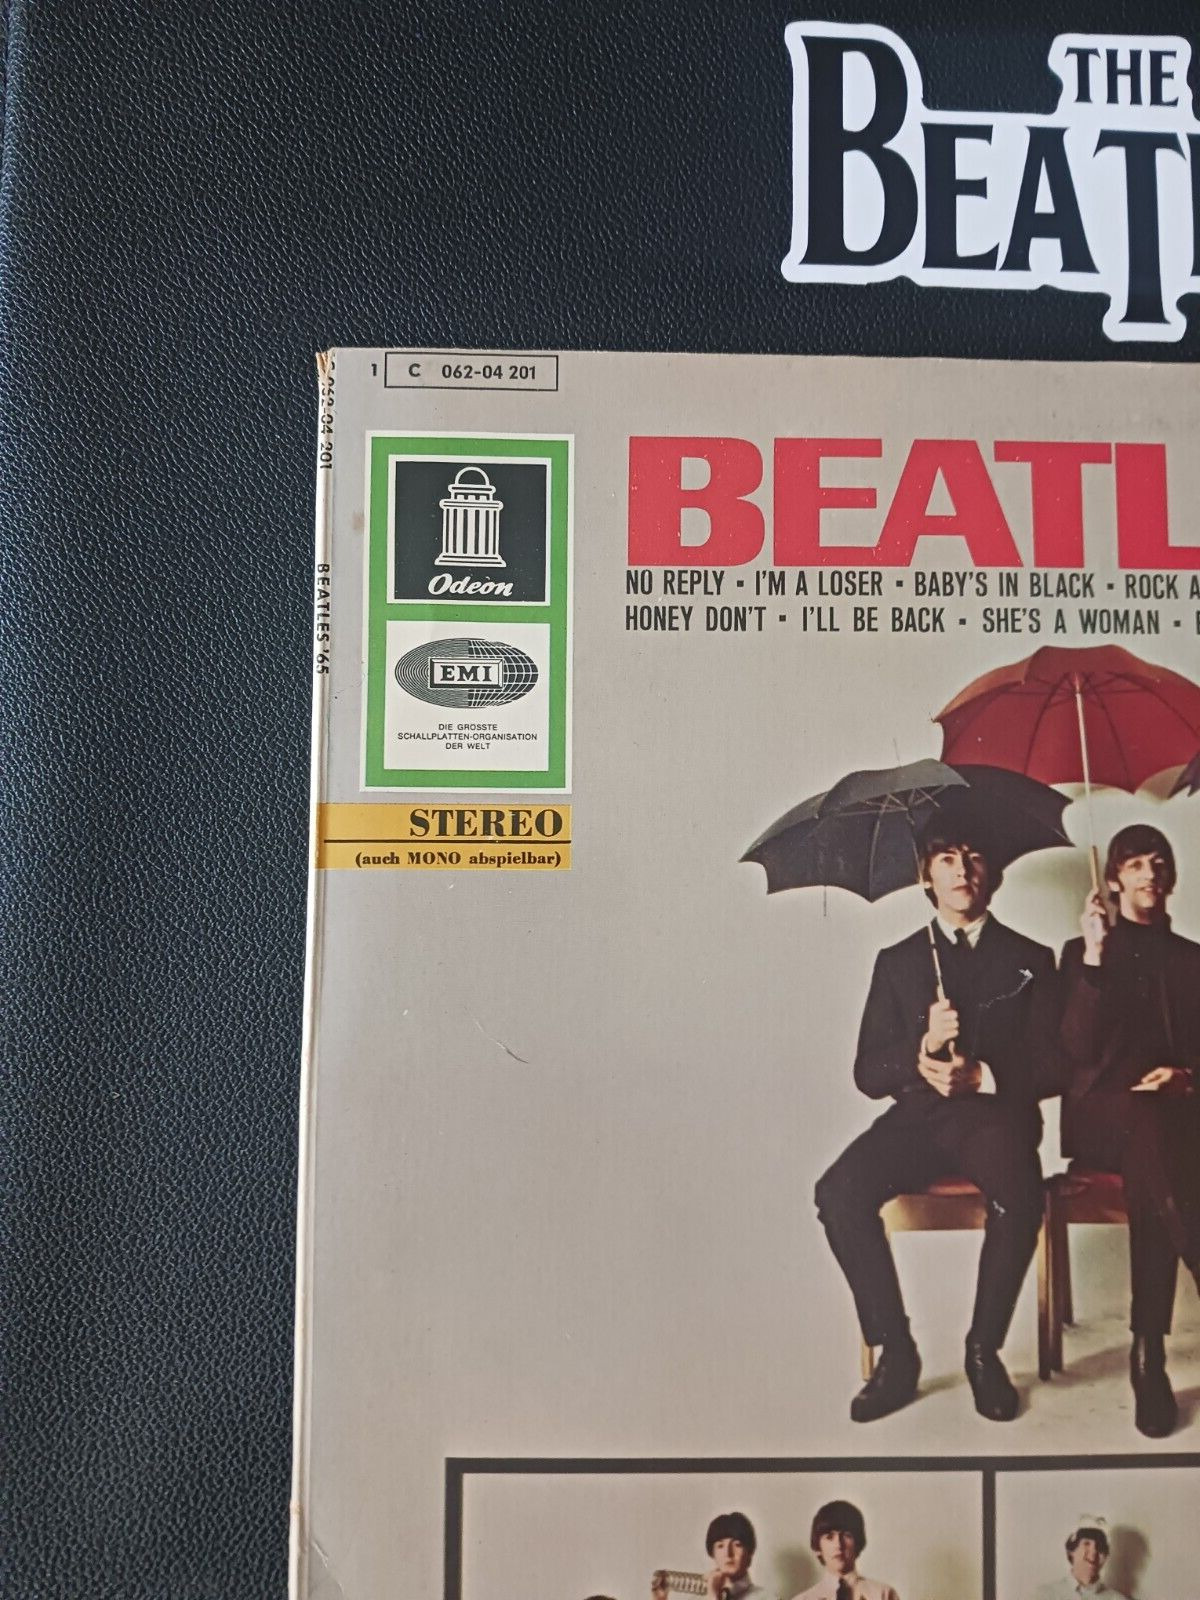 The Beatles - Beatles\'65 -Germany - Odeon + EMI - STEREO - EXCELLENT -TOP COPY *